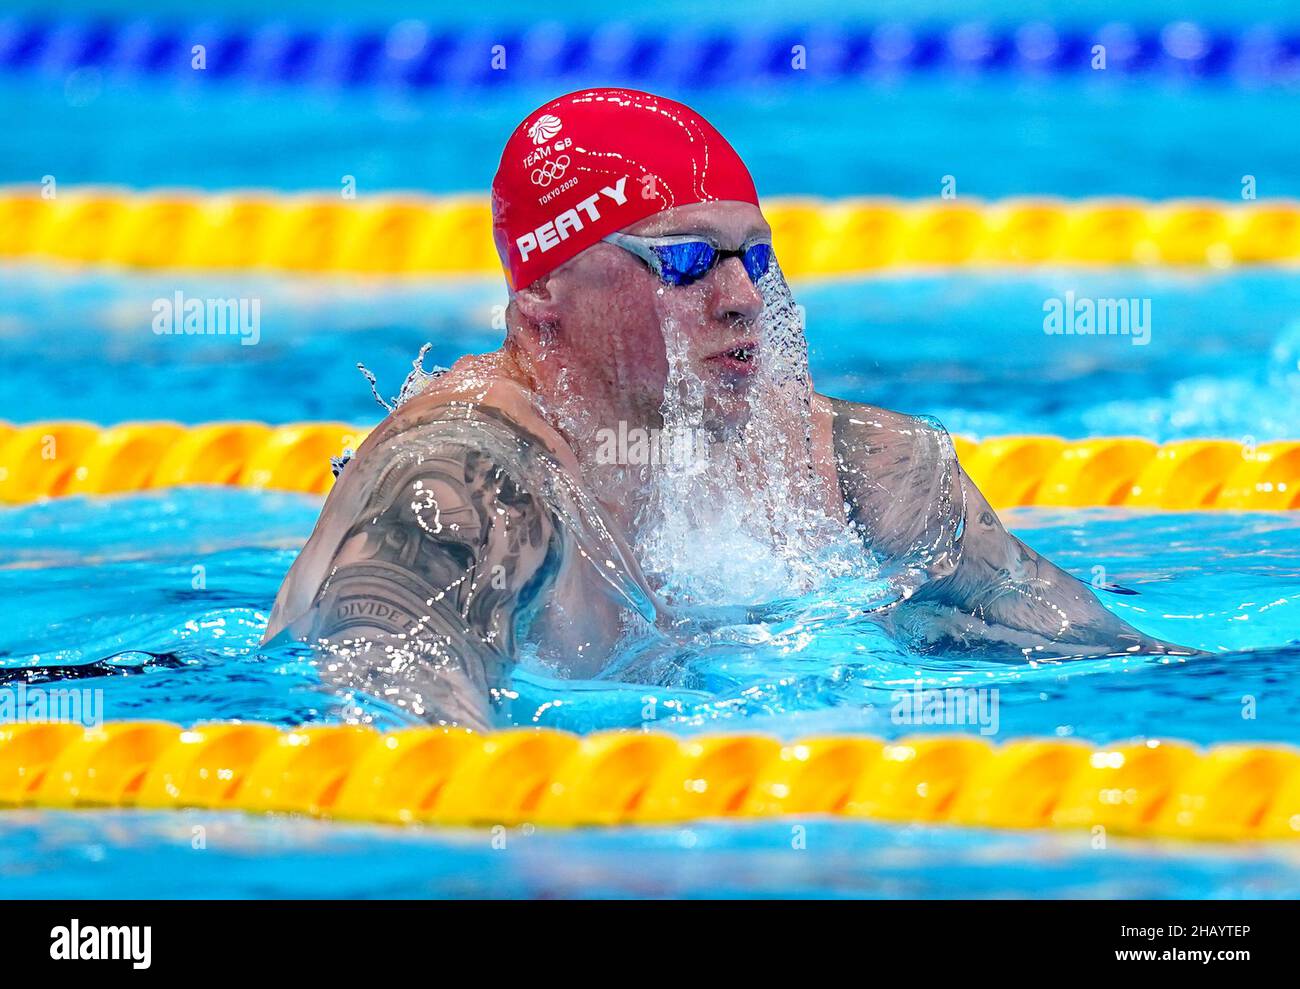 File photo dated 29-07-2021 of Great Britain's Adam Peaty. Great Britain dropped two places to fourth on the Olympics medal table in Tokyo. China and hosts Japan were second and third behind the United States. But it was still a hugely successful Games for Britain, who equalled their 65 medals tally at London 2012 by winning 22 gold, 21 silver and 22 bronze. Boxing, cycling, sailing and swimming led the way as athletics and rowing let the side down. Britain finished second on the final Paralympics medal table with its 124-medal haul of 41 gold, 38 silver and 45 bronze only behind China. Issue  Stock Photo